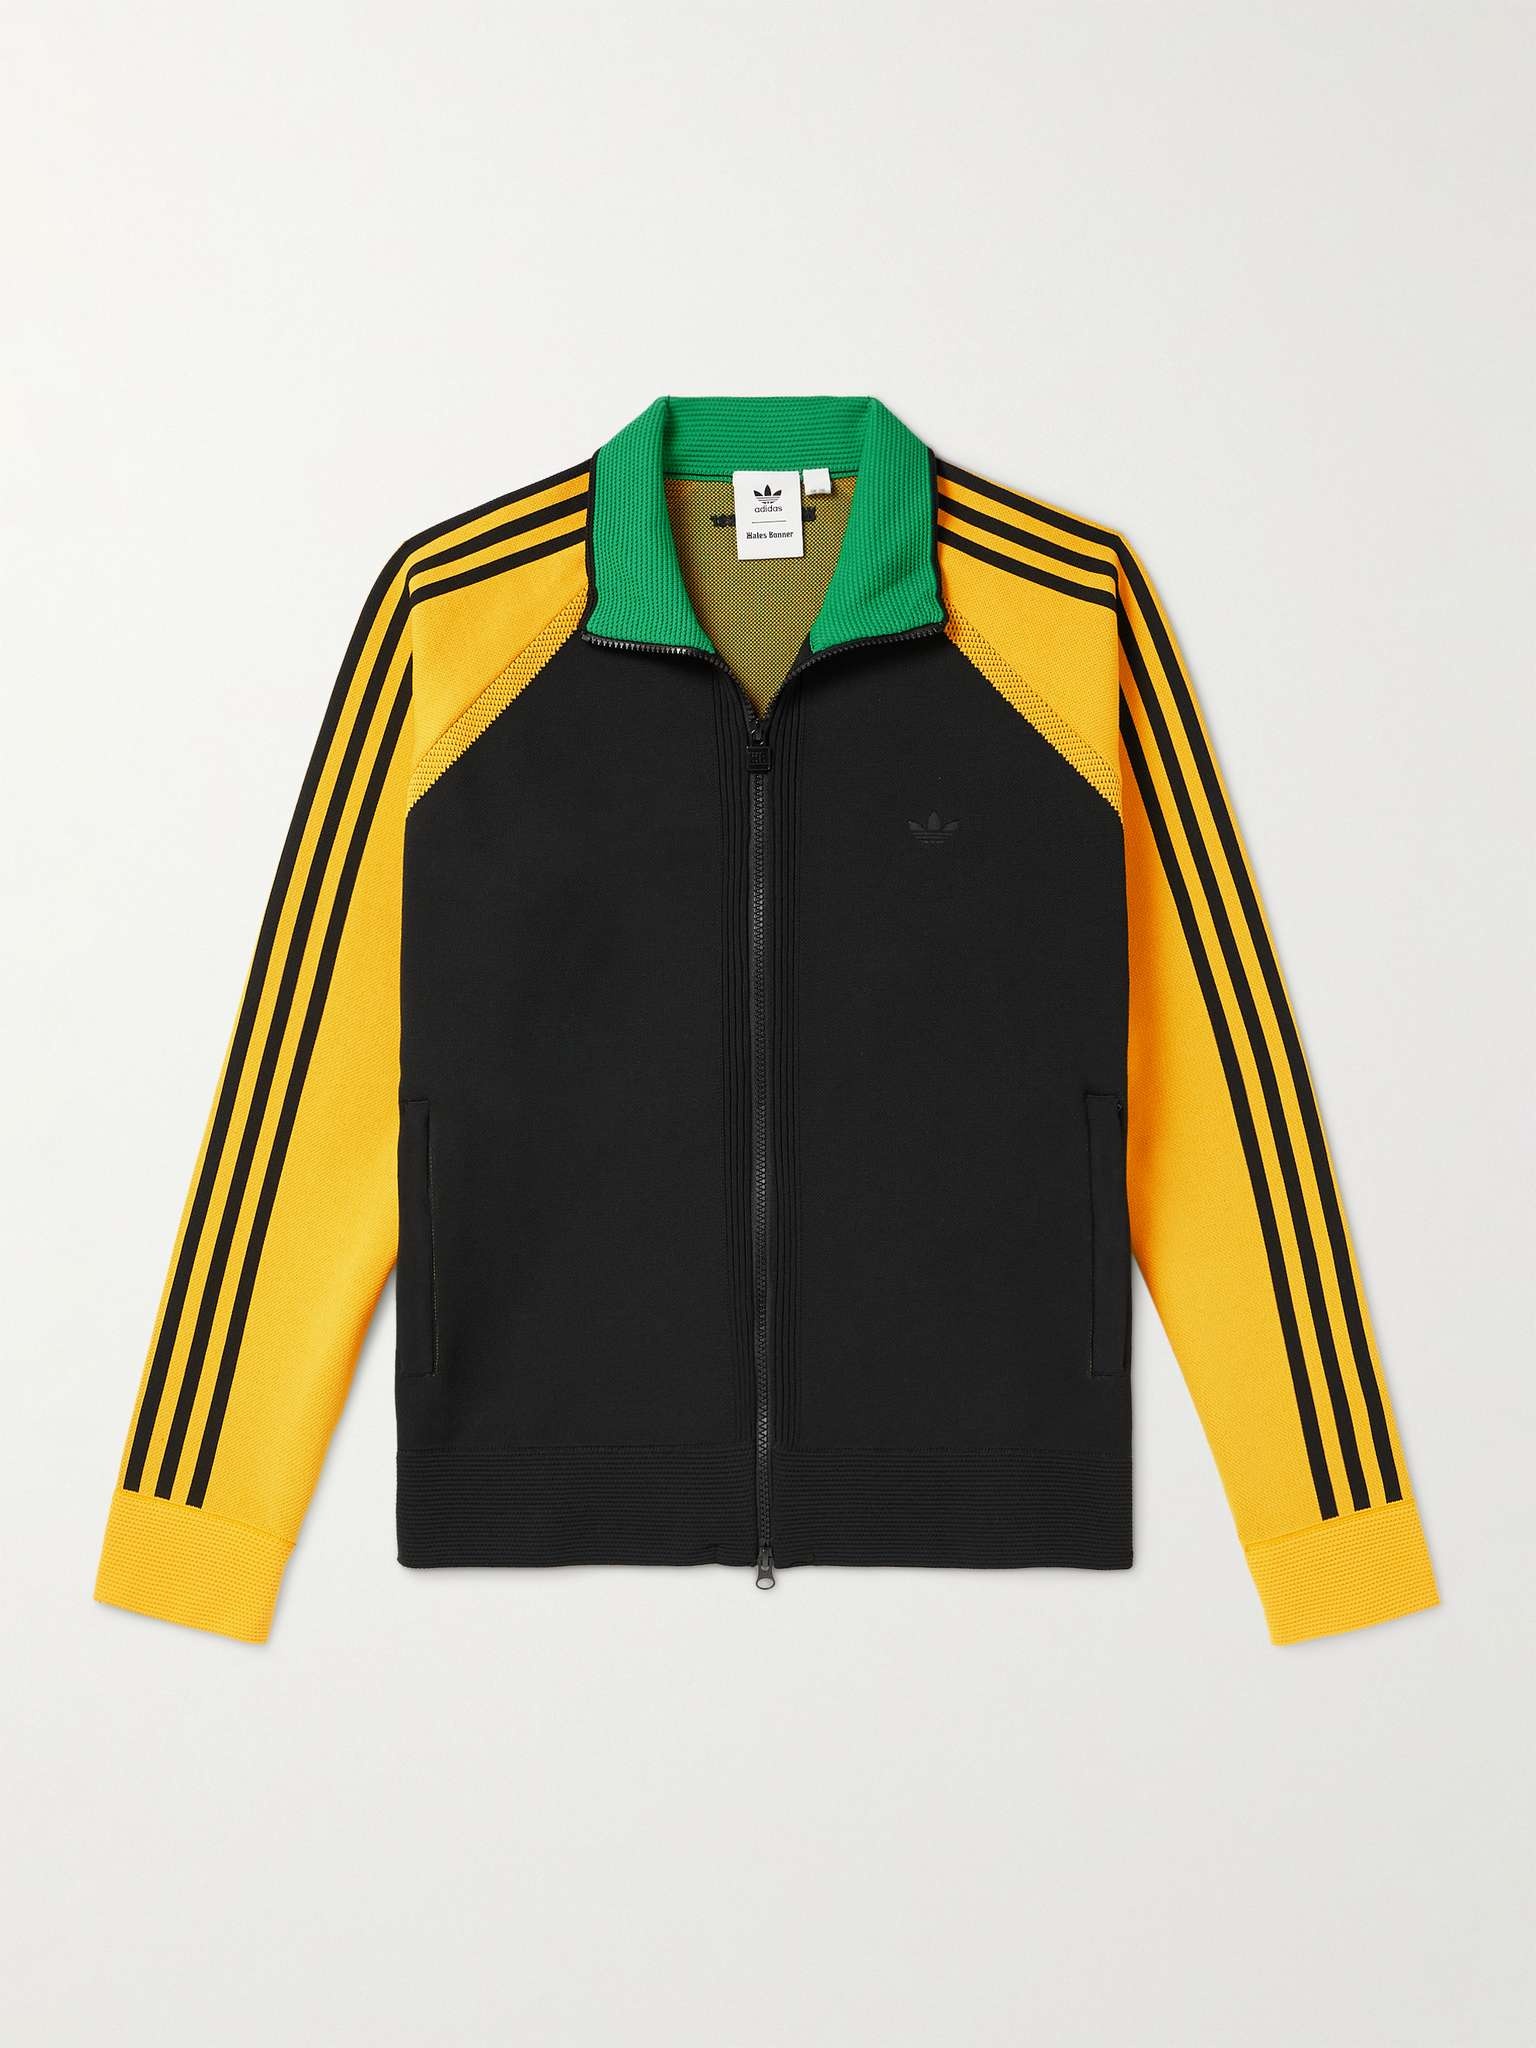 + Wales Bonner Two-Tone Knitted Zip-Up Track Jacket - 1